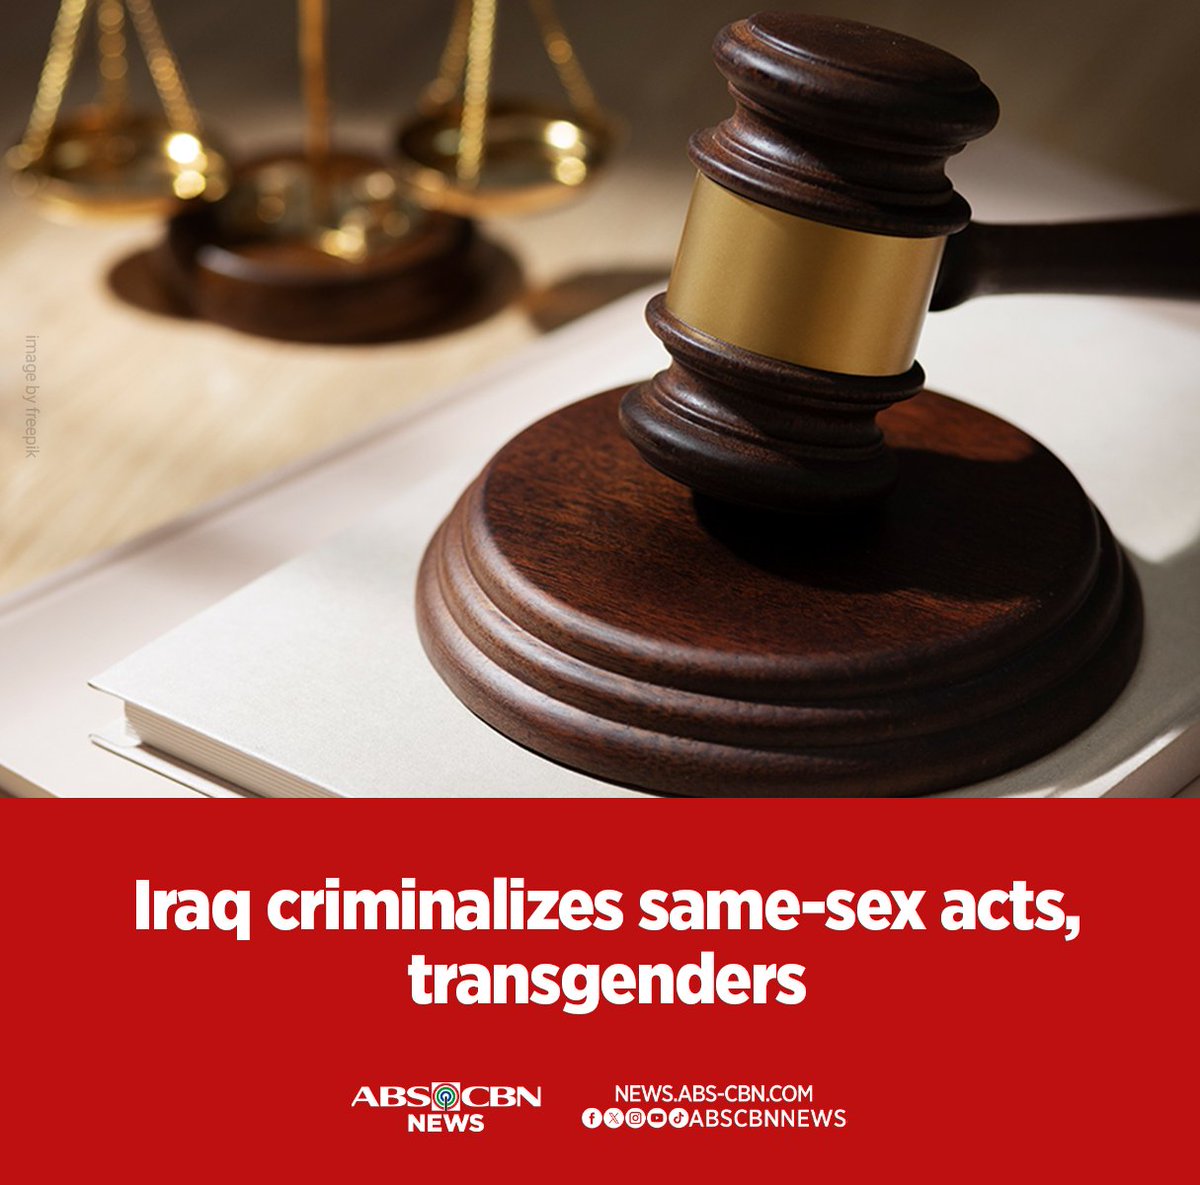 Iraq will sentence same-sex relations up to 15 years in prison and transgender people to three years in jail. READ: abscbn.news/3WDMarh